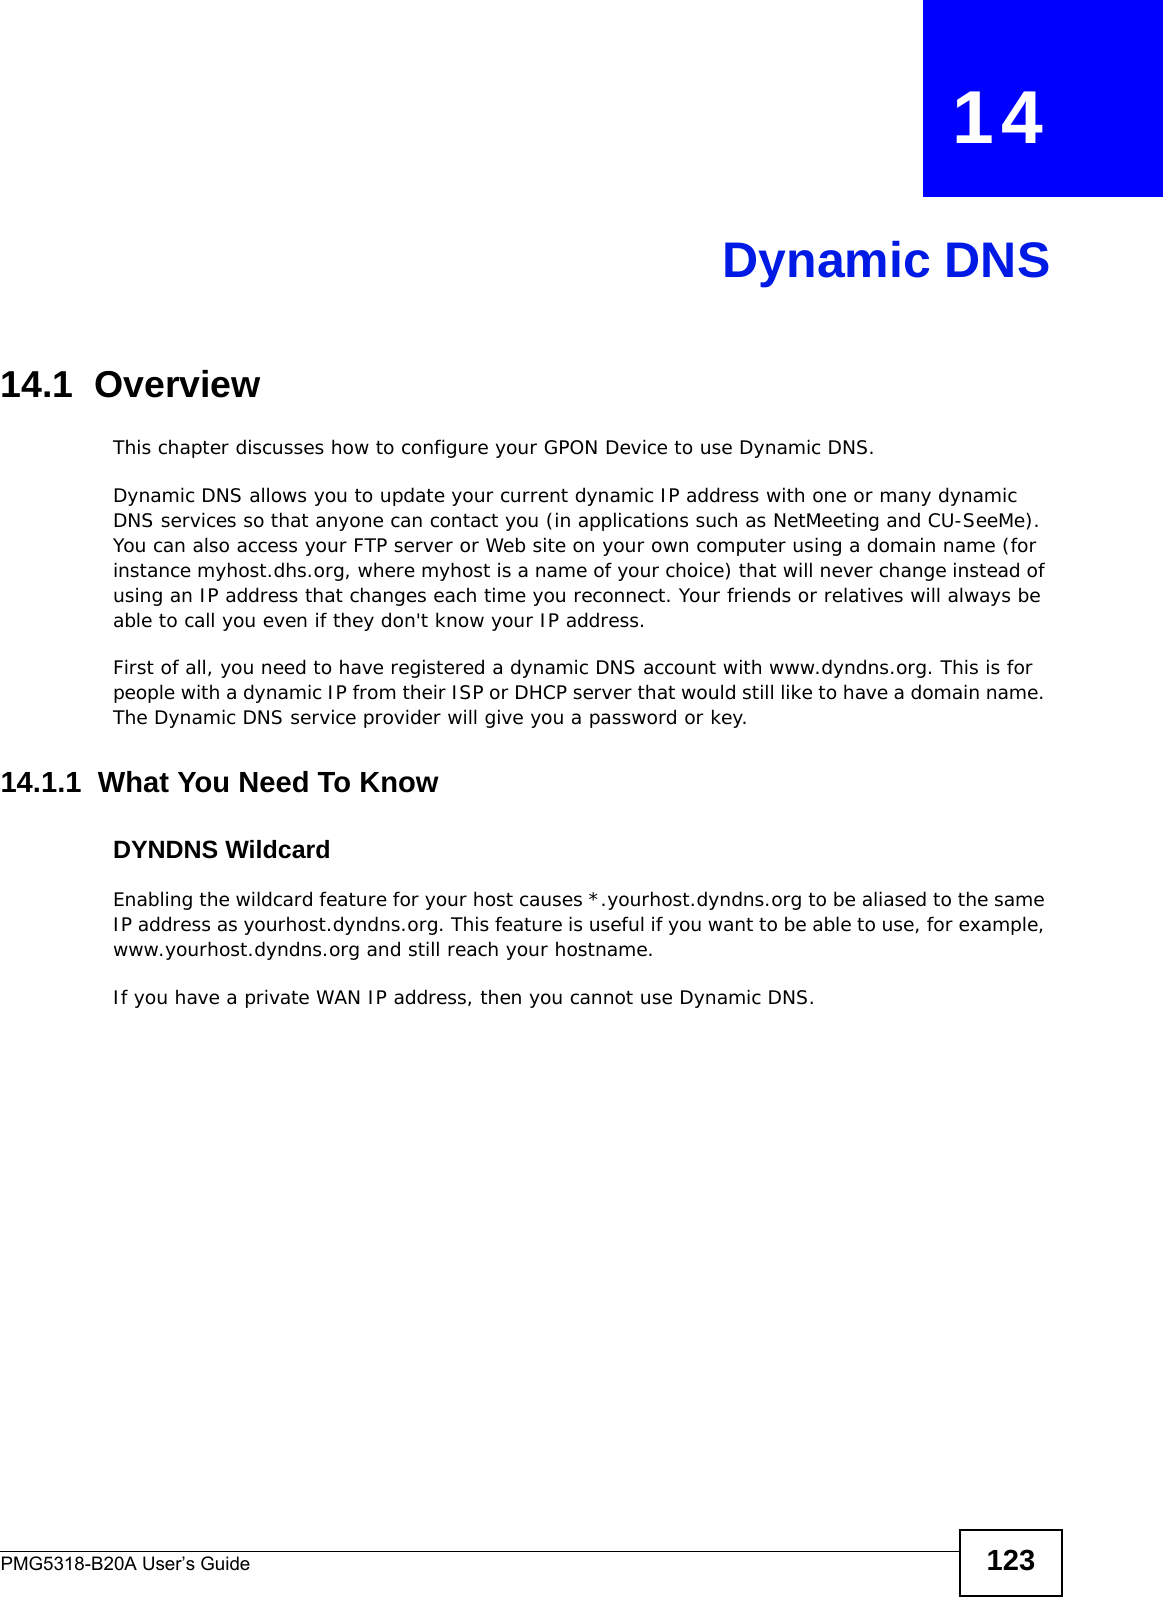 PMG5318-B20A User’s Guide 123CHAPTER   14Dynamic DNS14.1  Overview This chapter discusses how to configure your GPON Device to use Dynamic DNS.Dynamic DNS allows you to update your current dynamic IP address with one or many dynamic DNS services so that anyone can contact you (in applications such as NetMeeting and CU-SeeMe). You can also access your FTP server or Web site on your own computer using a domain name (for instance myhost.dhs.org, where myhost is a name of your choice) that will never change instead of using an IP address that changes each time you reconnect. Your friends or relatives will always be able to call you even if they don&apos;t know your IP address.First of all, you need to have registered a dynamic DNS account with www.dyndns.org. This is for people with a dynamic IP from their ISP or DHCP server that would still like to have a domain name. The Dynamic DNS service provider will give you a password or key. 14.1.1  What You Need To KnowDYNDNS WildcardEnabling the wildcard feature for your host causes *.yourhost.dyndns.org to be aliased to the same IP address as yourhost.dyndns.org. This feature is useful if you want to be able to use, for example, www.yourhost.dyndns.org and still reach your hostname.If you have a private WAN IP address, then you cannot use Dynamic DNS.